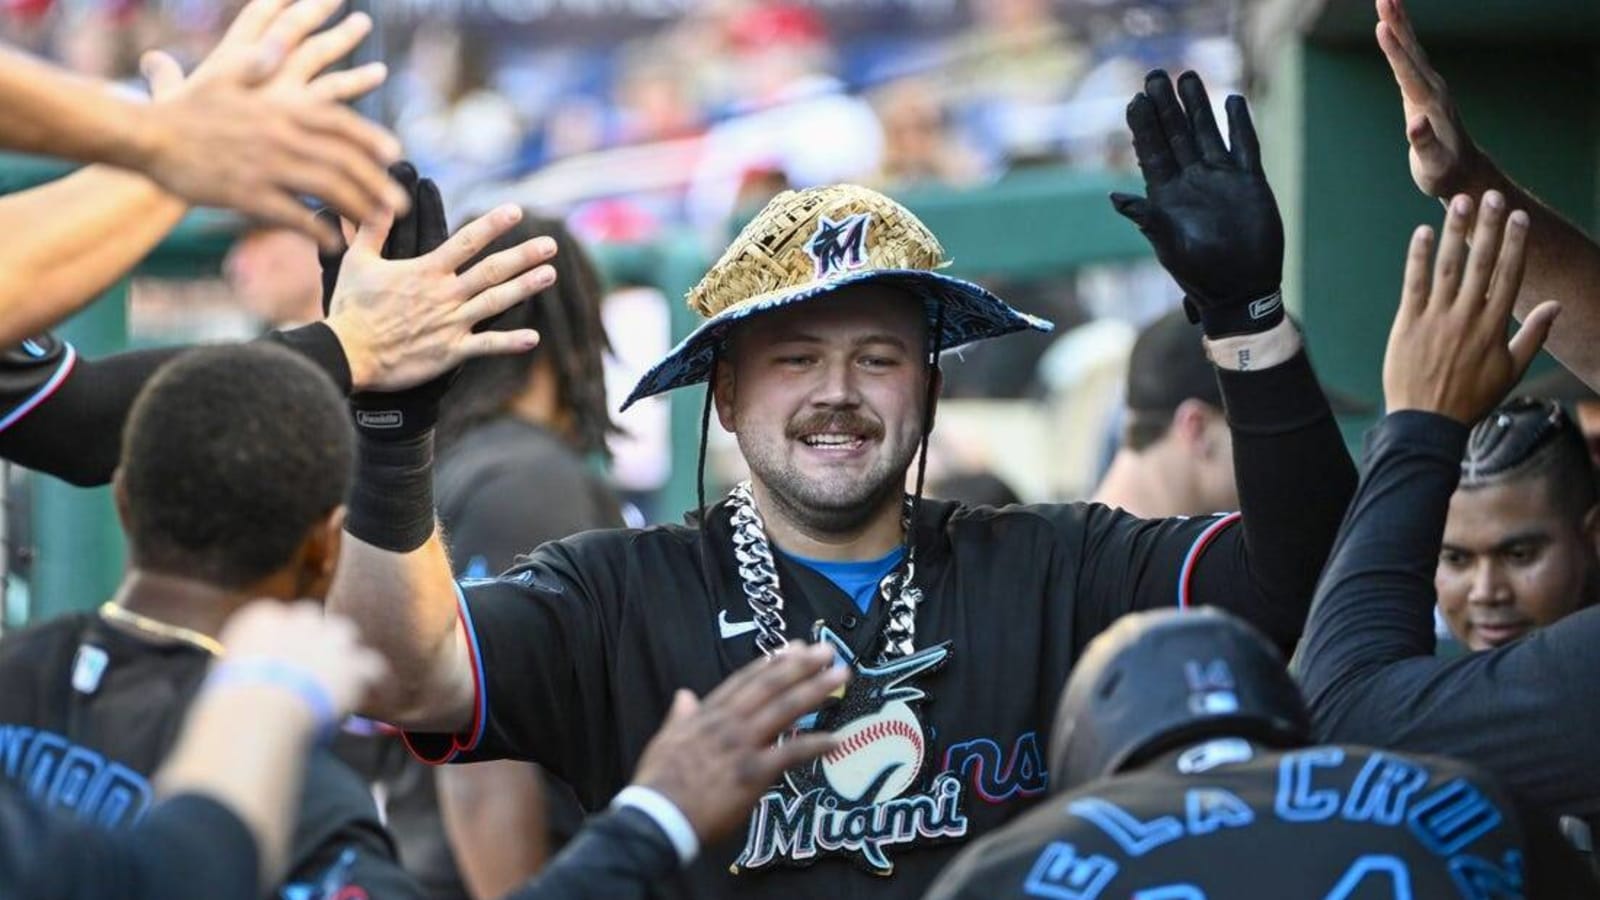 Marlins go for 4-game sweep against Nationals